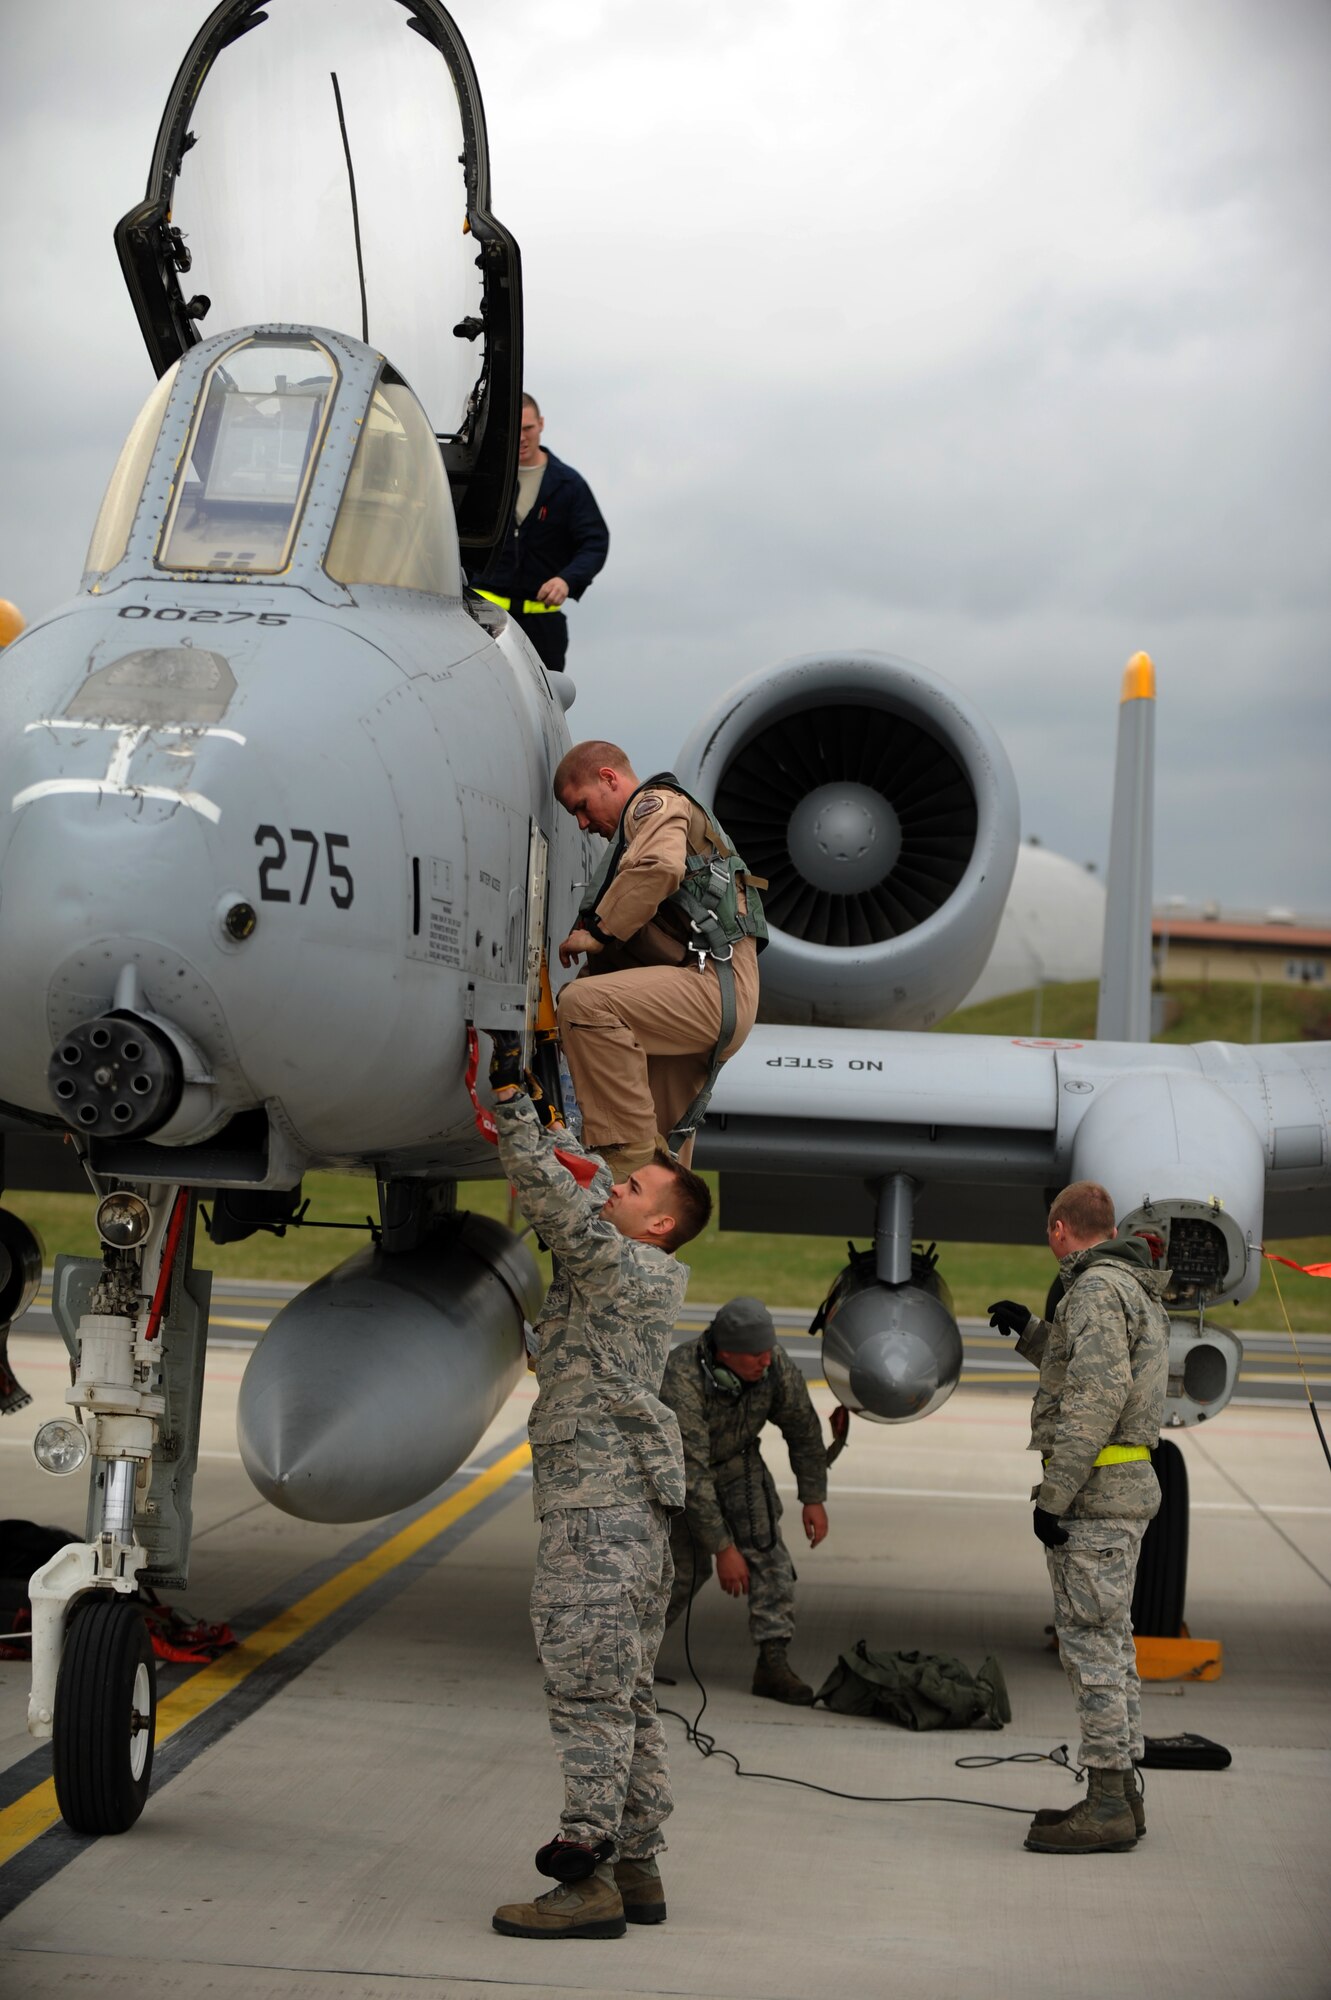 SPANGDAHLEM AIR BASE, Germany – Capt. Mike Krestyn, 81st Fighter Squadron pilot and chief of plans, climbs down from the cockpit of an A-10 Thunderbolt II on Ramp 4 here April 10. Krestyn was one of the squadron’s six pilots returning from a deployment from Bagram Airfield, Afghanistan, providing close air support during Operation Enduring Freedom. (U.S. Air Force photo by Airman 1st Class Matthew B. Fredericks/Released)